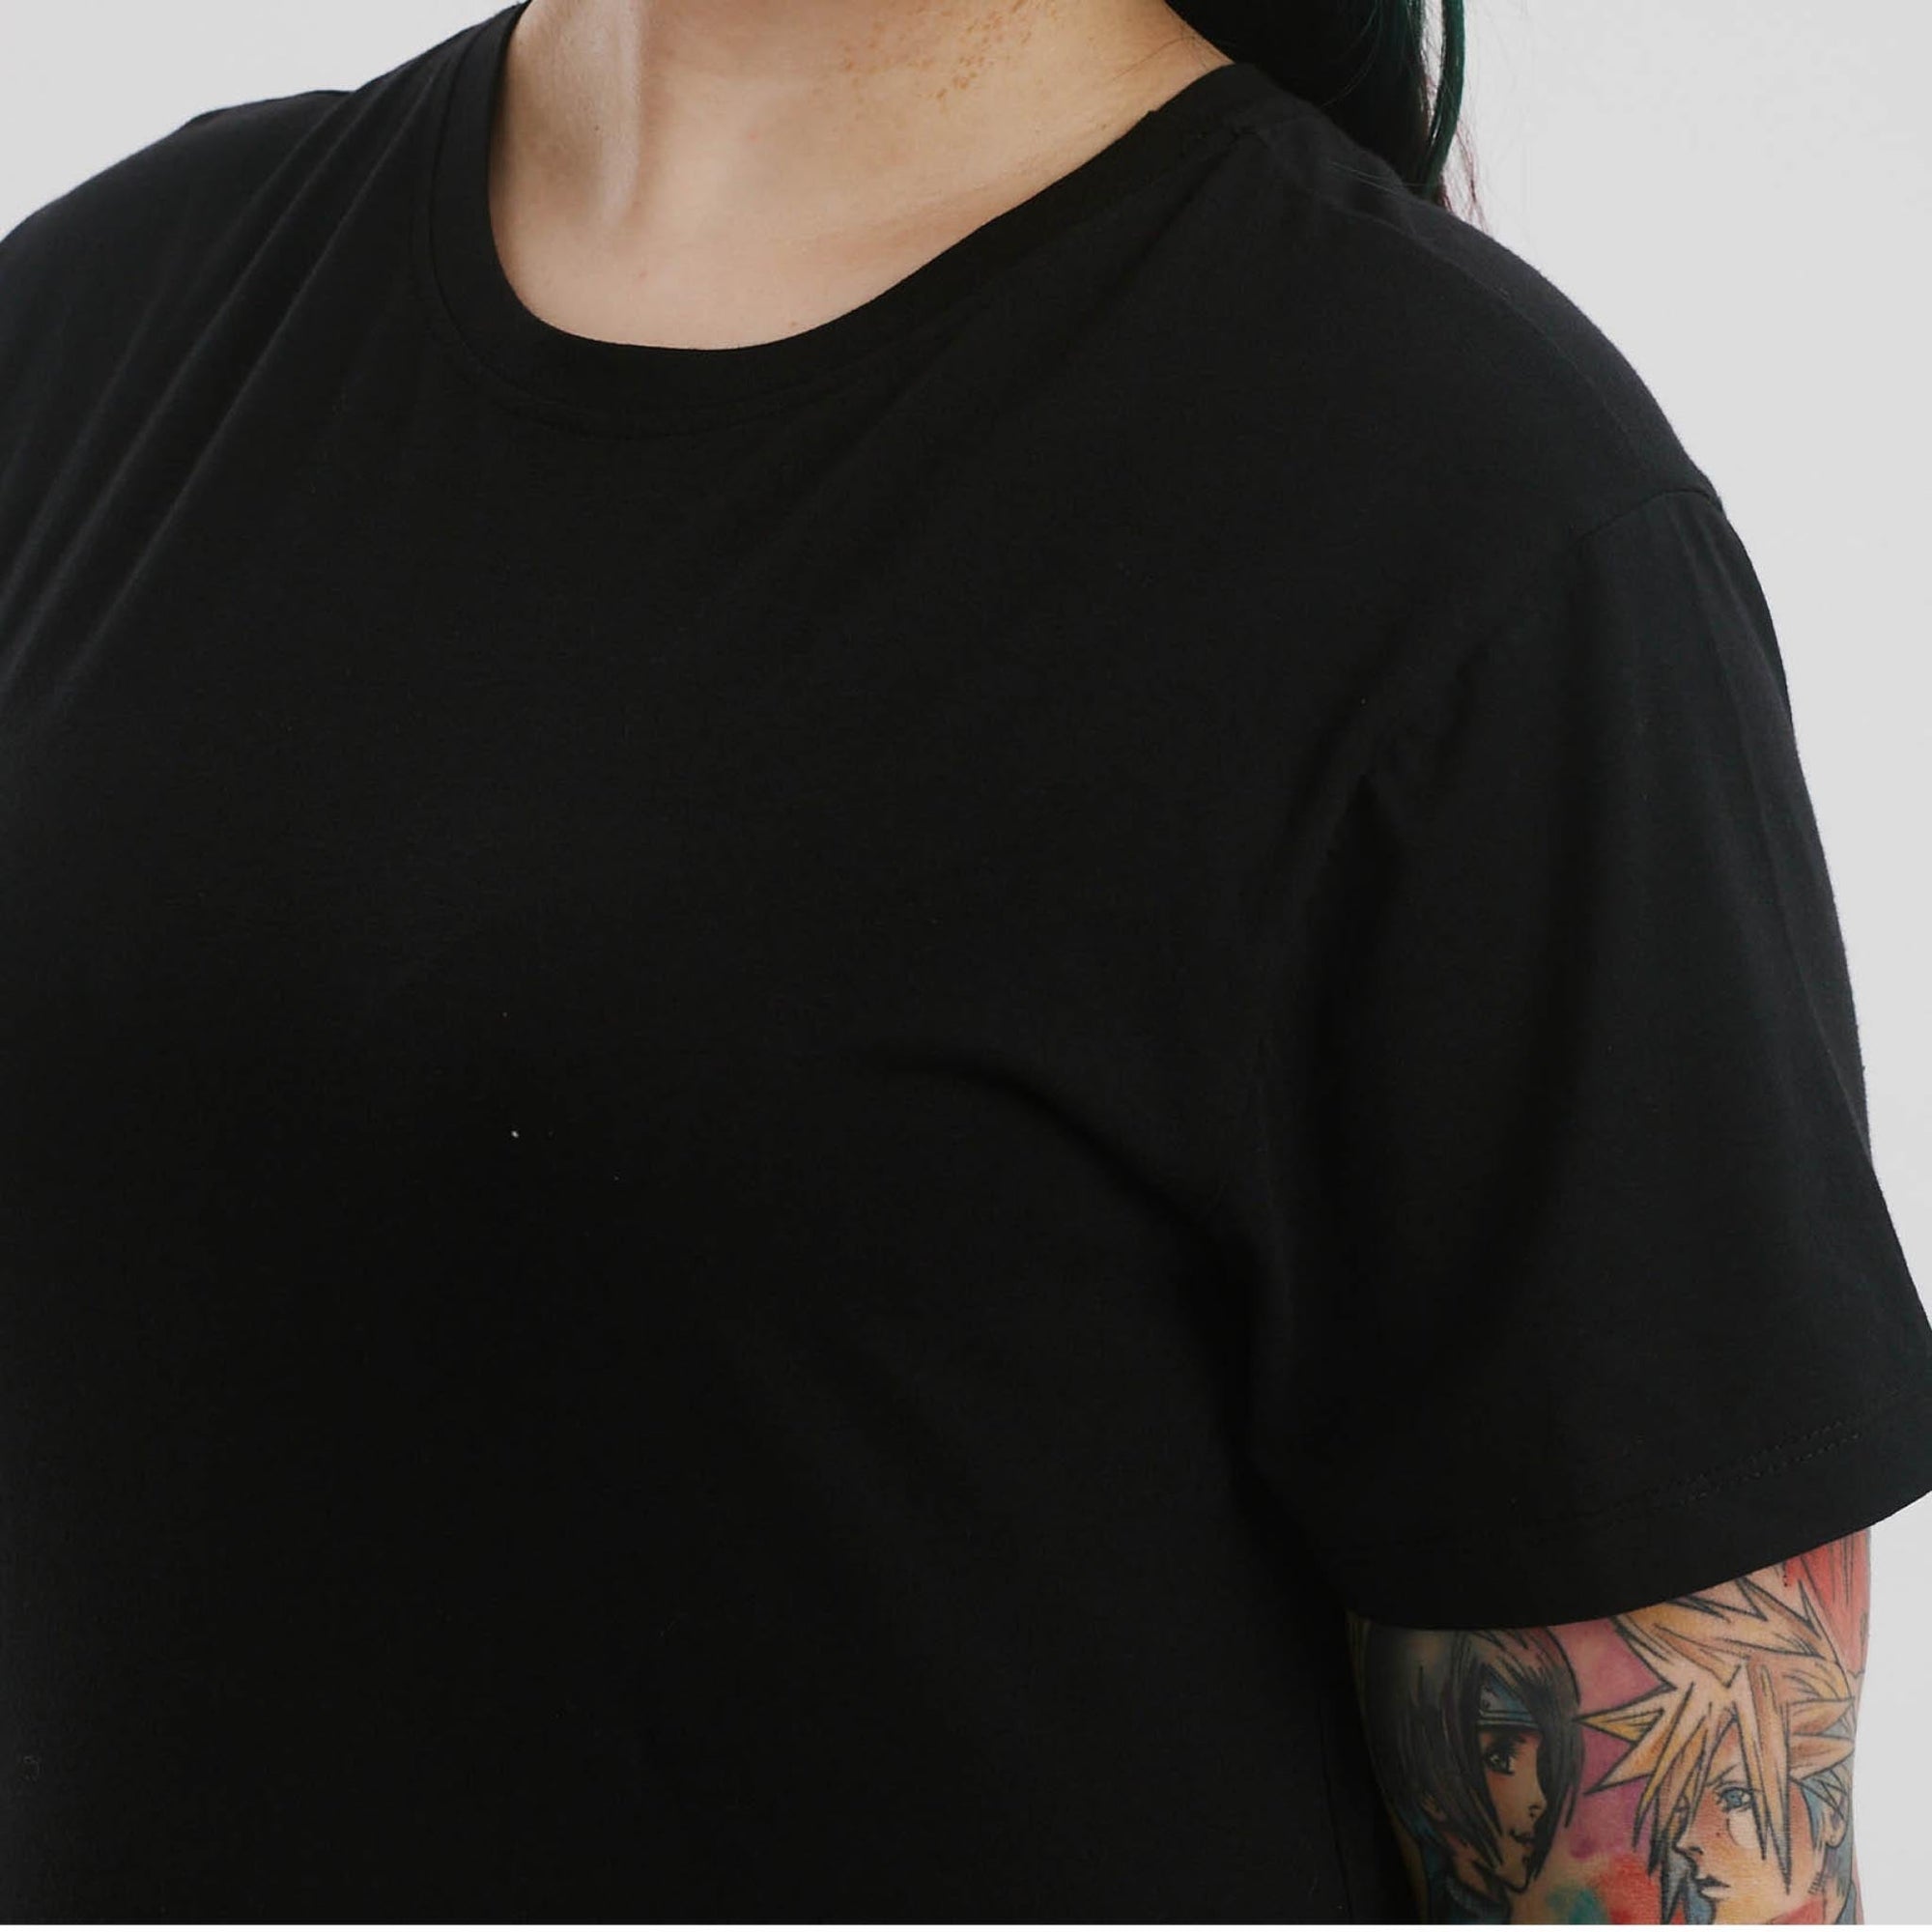 The Comfy T-Shirt-Womens. No tags, no lables. The Shapes United.